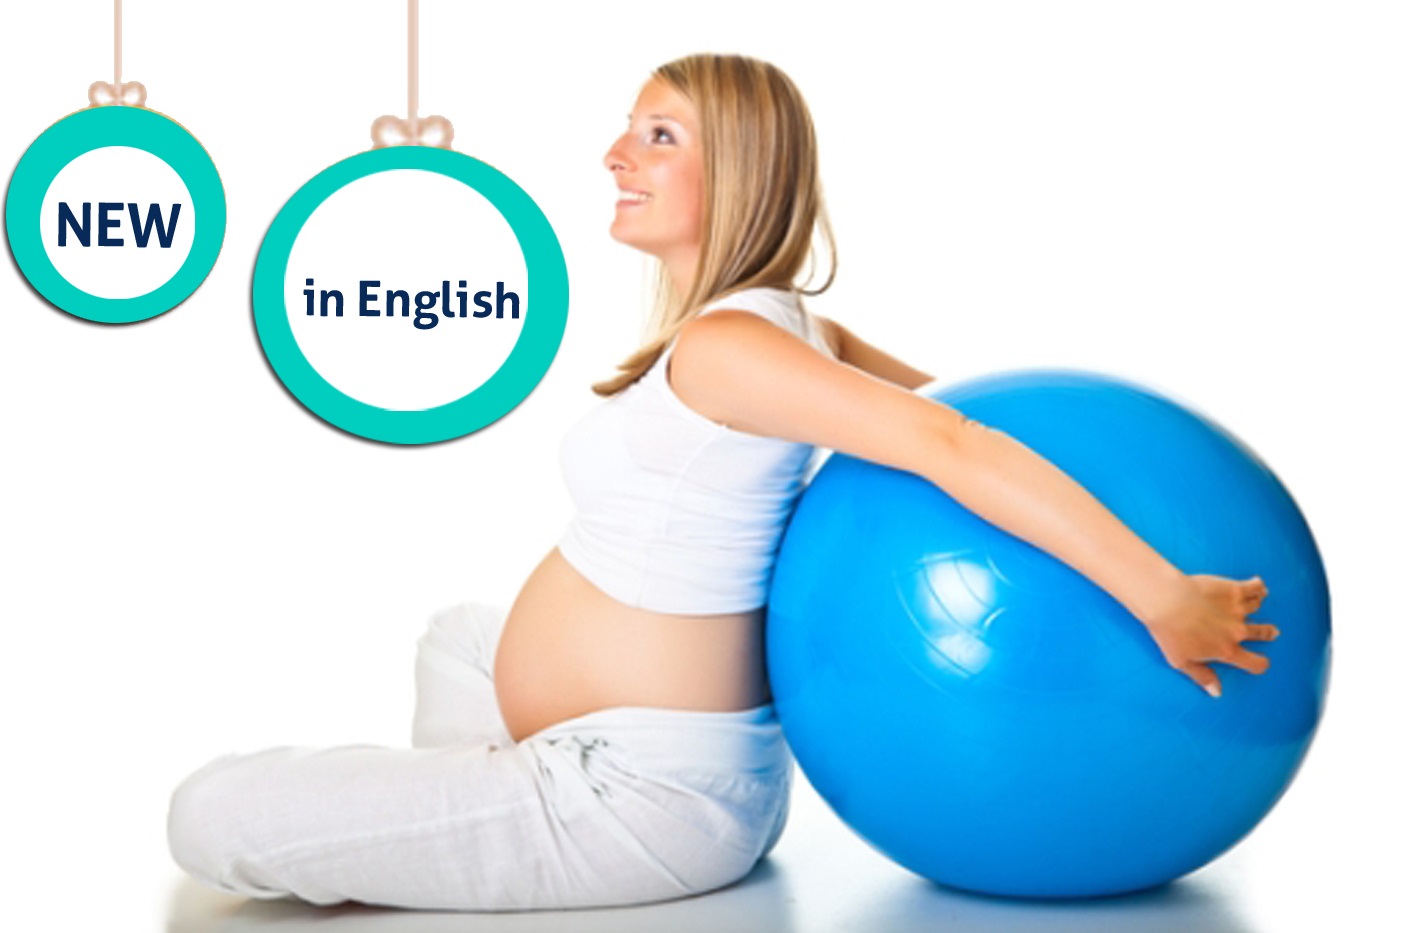 Birth with No Regret Childbirth Education & Breathing Techniques